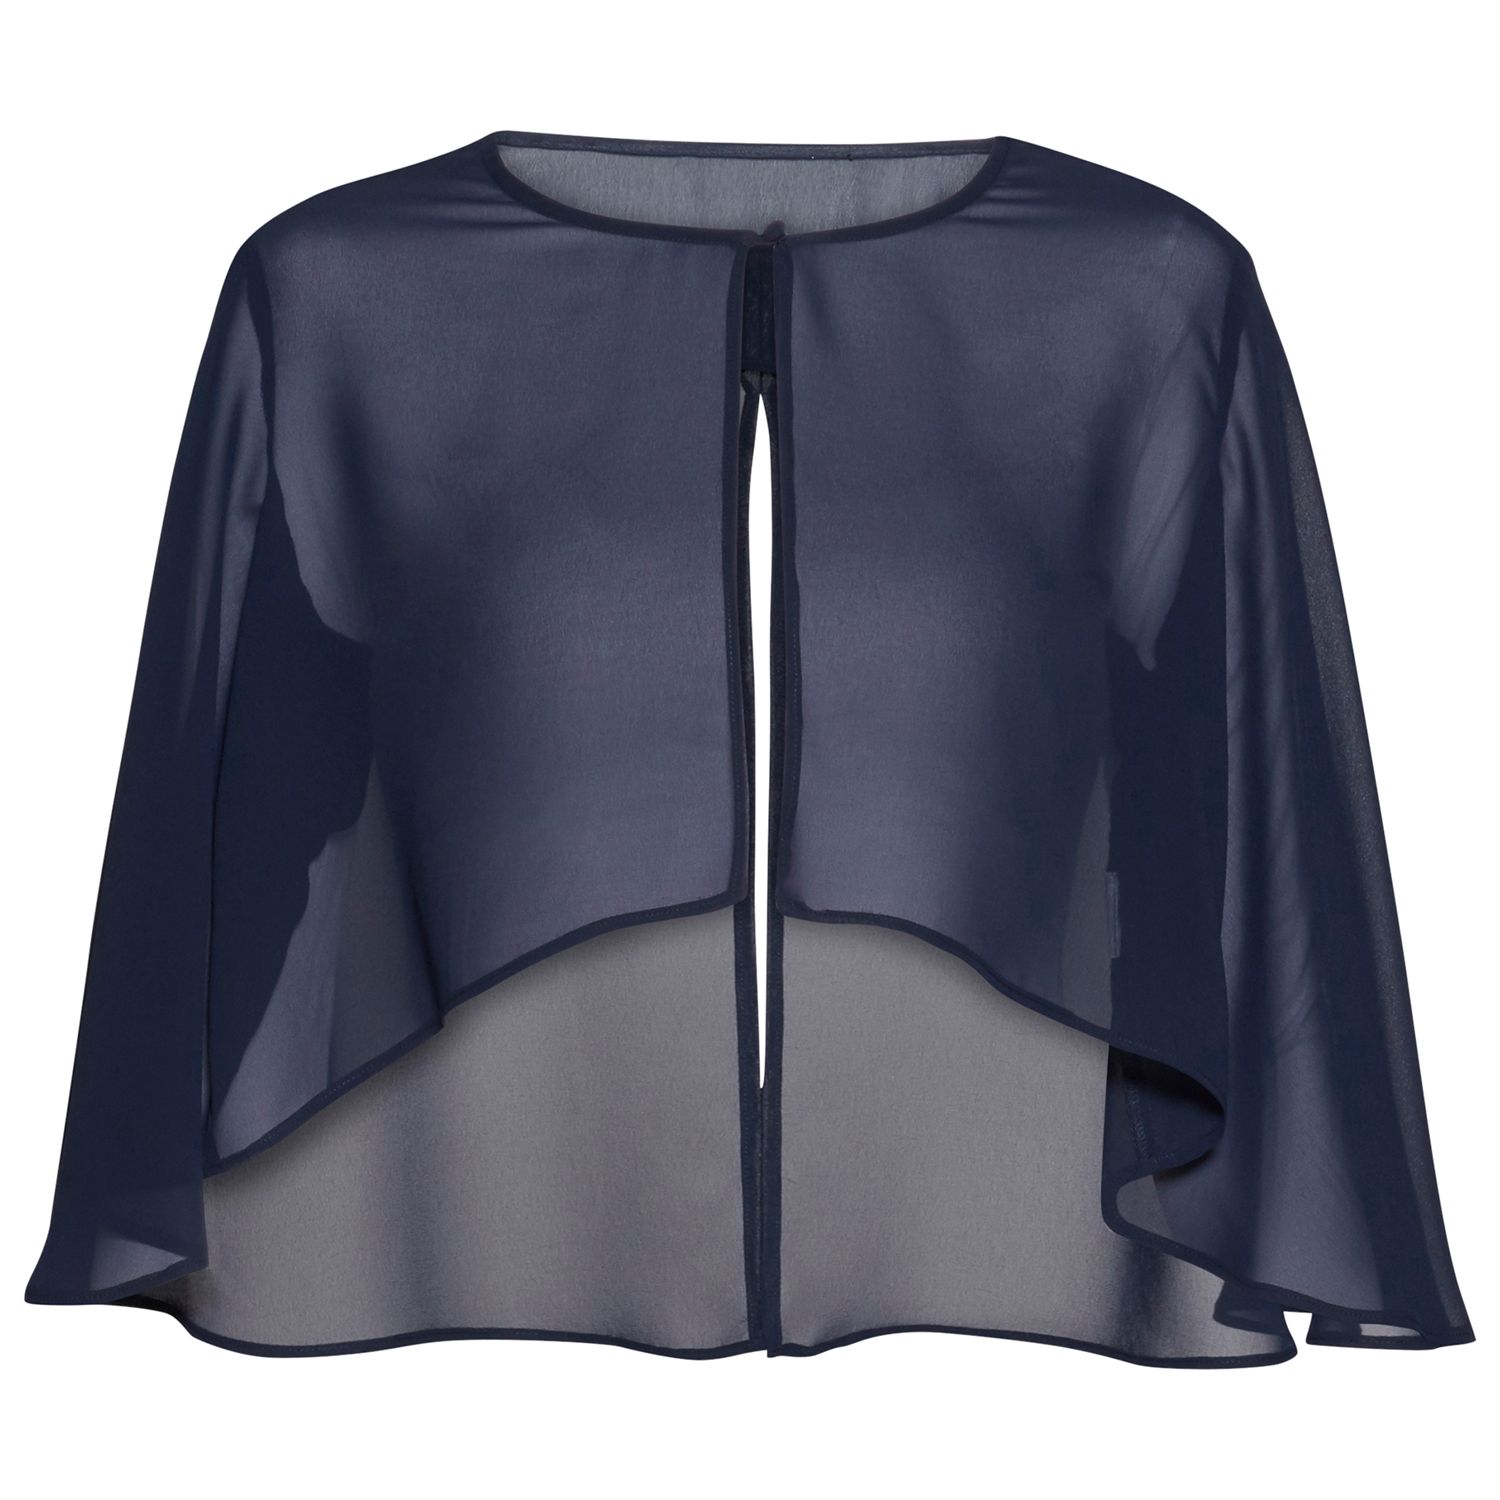 Gina Bacconi Chiffon Cape With Open Back Detail, Spring Navy, 10